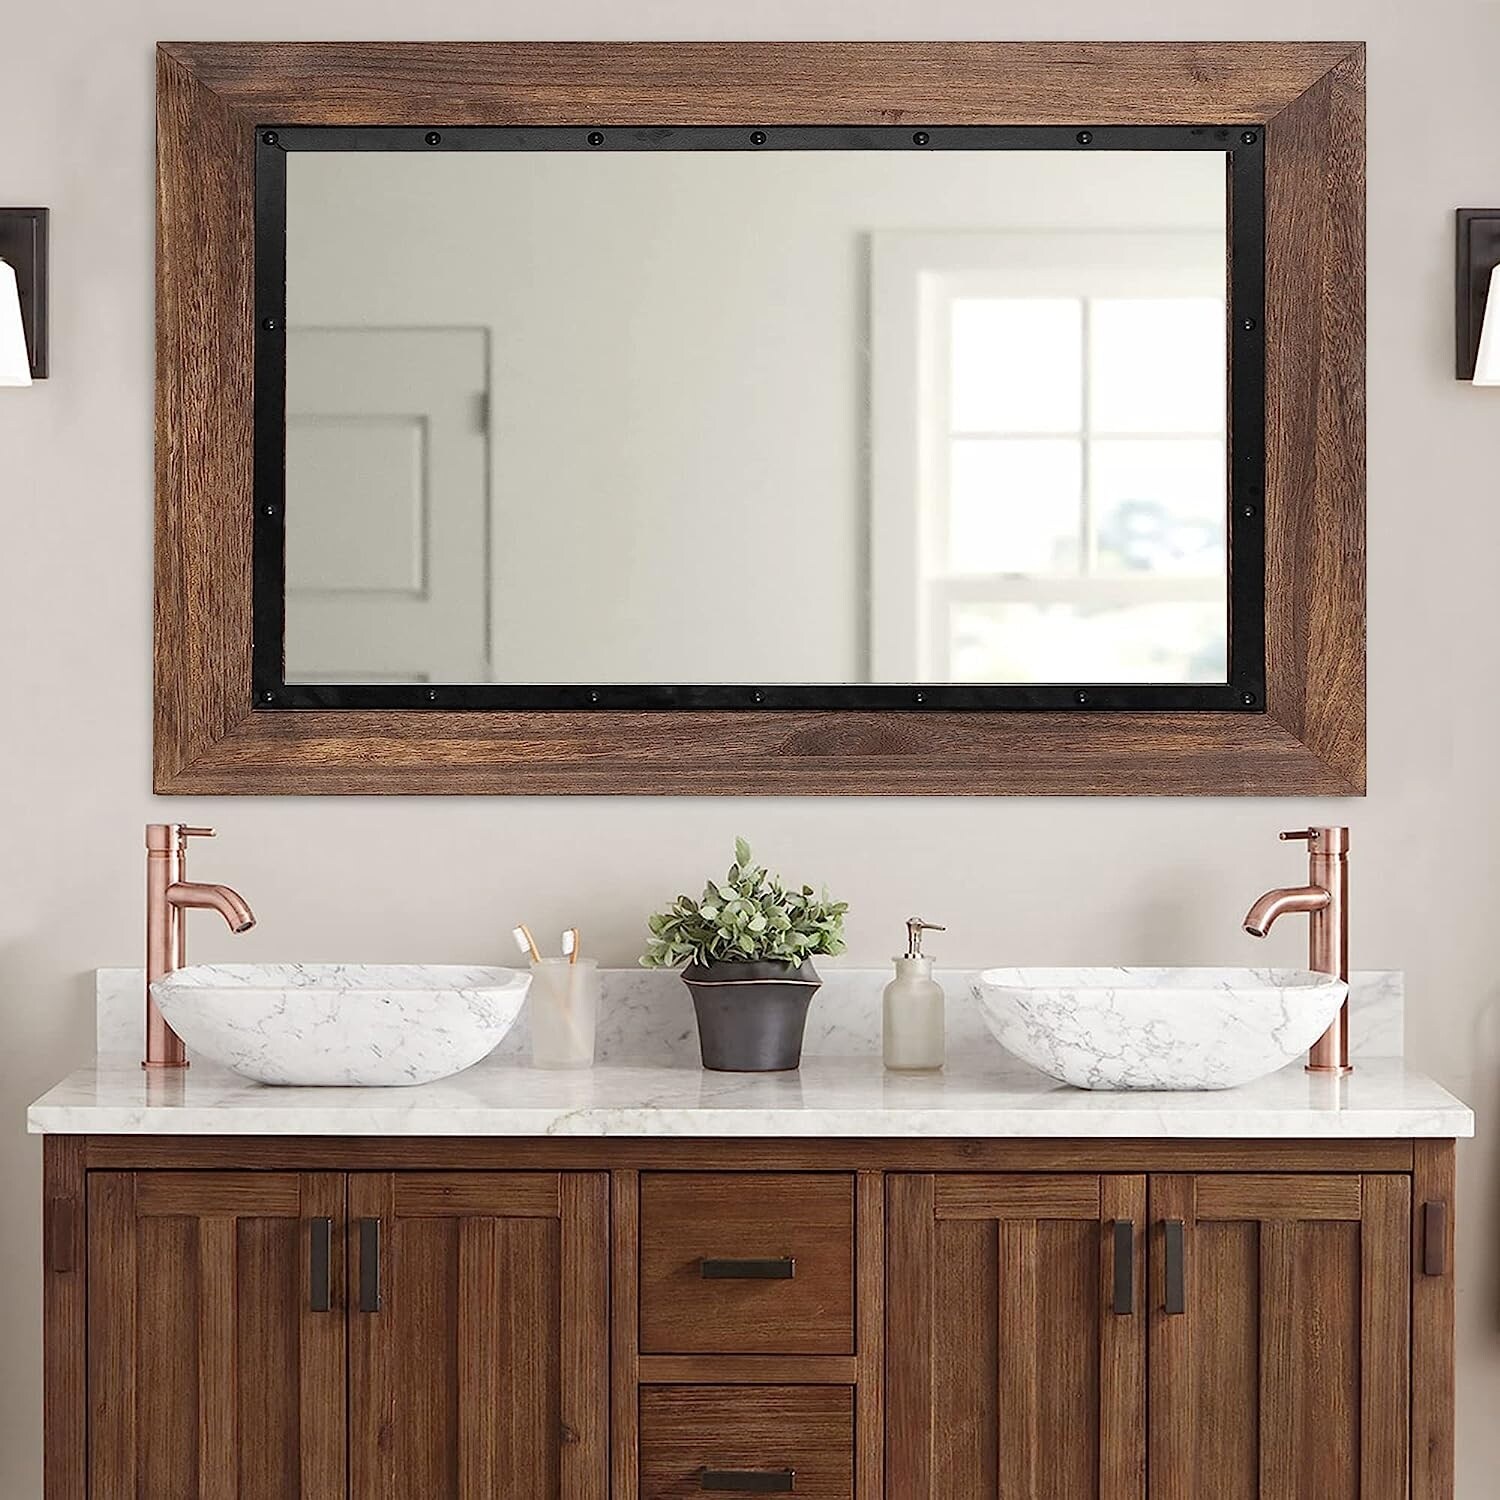 https://ak1.ostkcdn.com/images/products/is/images/direct/d073f0c3e4db13597ed4bc6837e7d6bff5c35cd6/Rustic-Wooden-and-Embedded-Iron-Framed-Wall-Bathroom-Vanity-Mirror.jpg